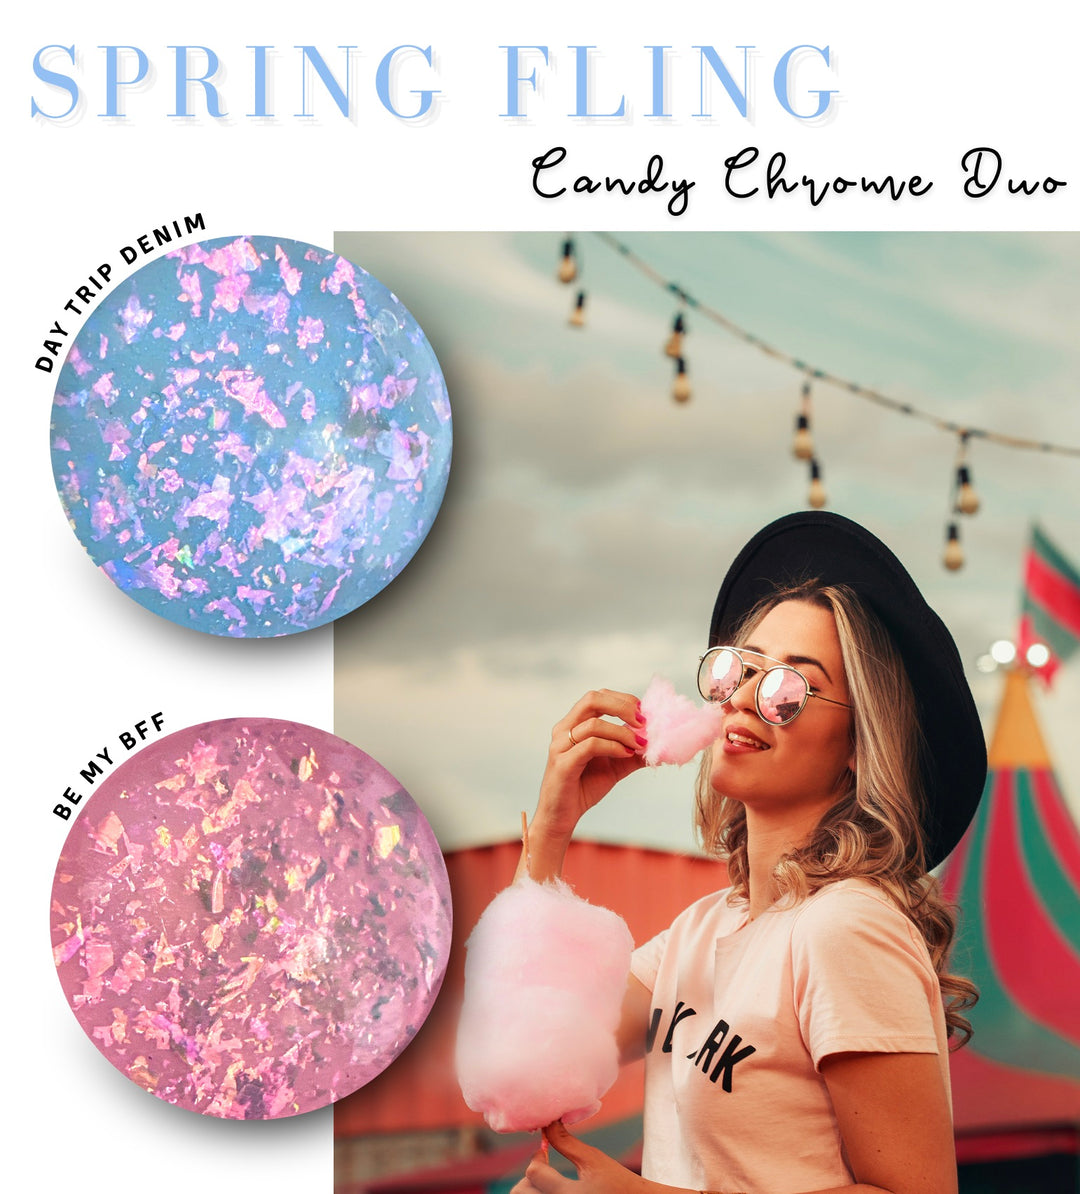 Spring Fling Candy Chrome Duo